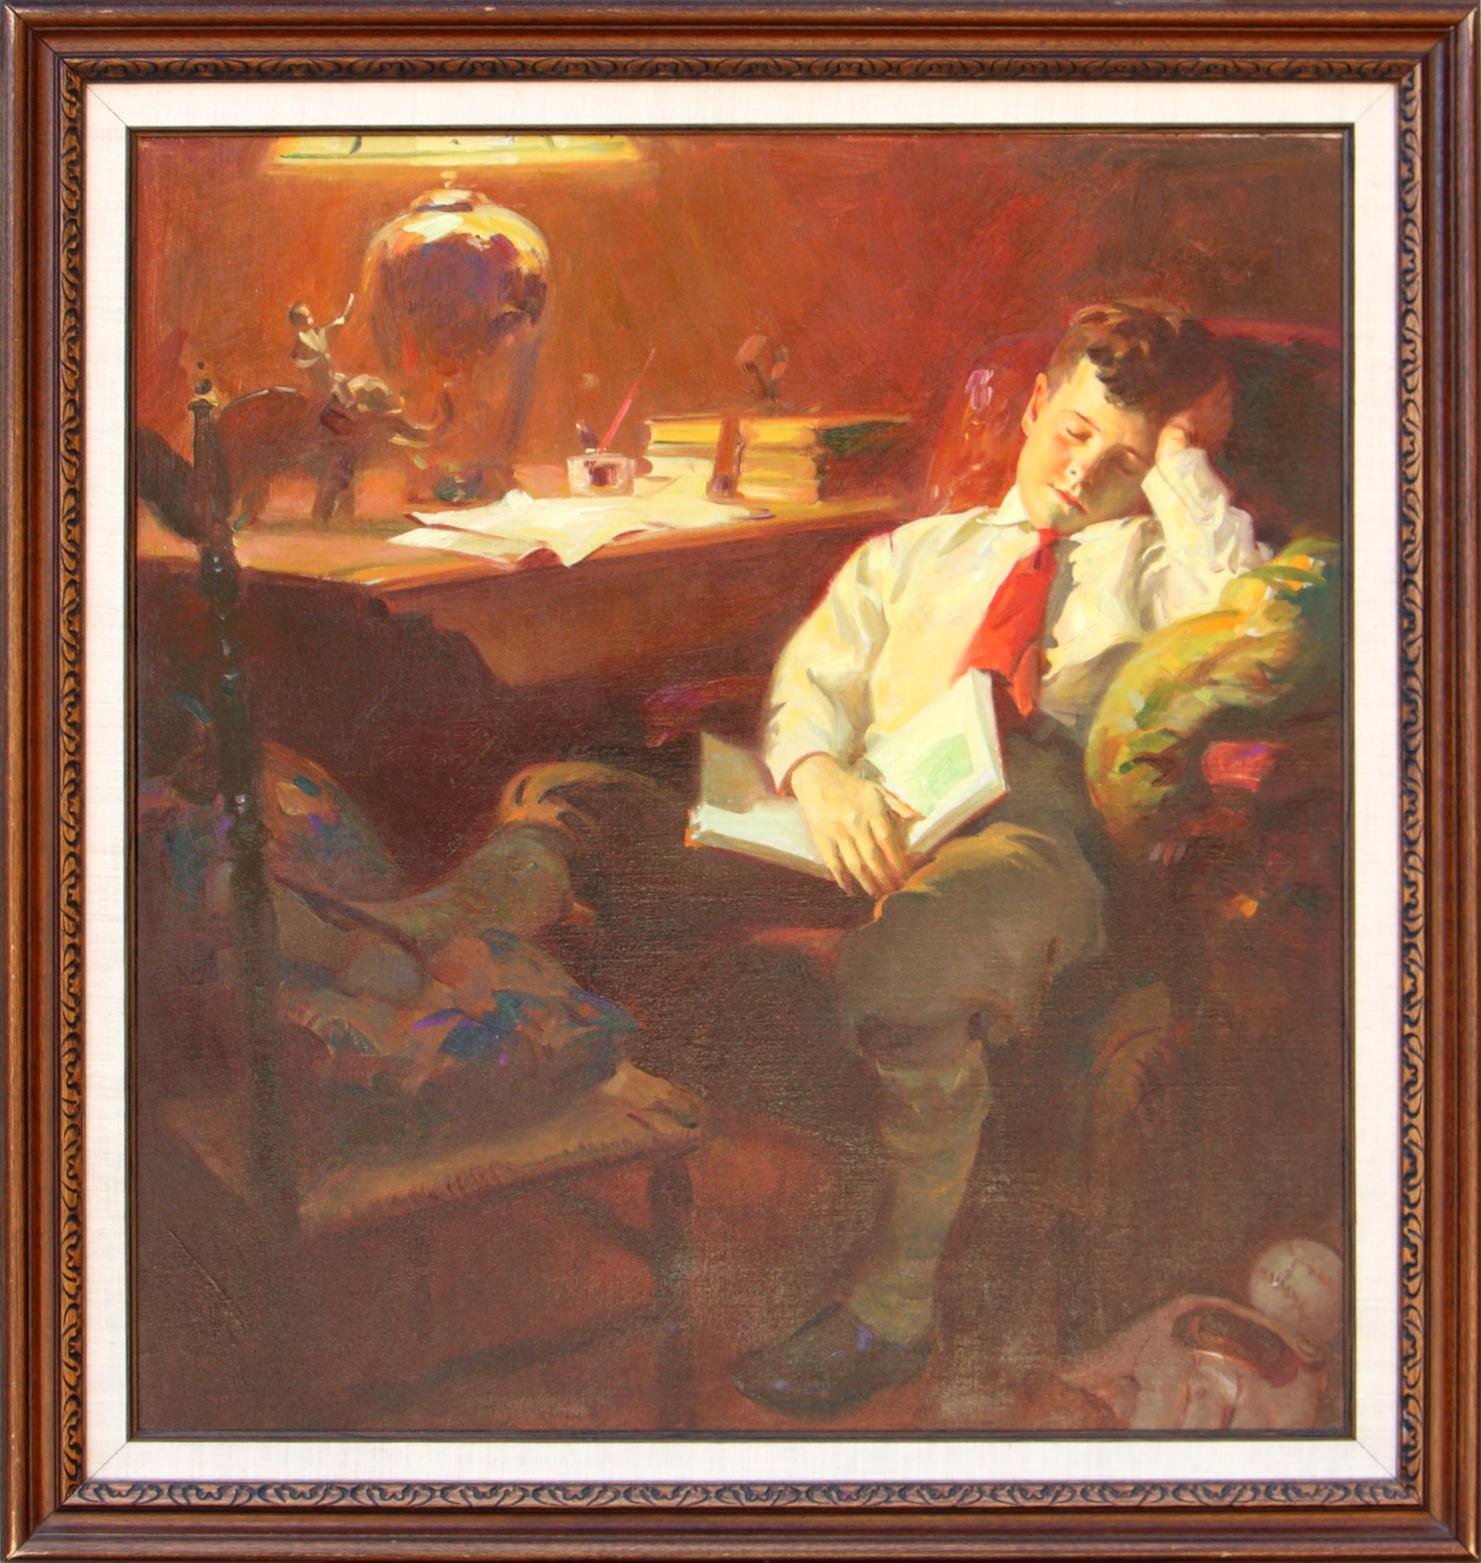 Boy Falls Asleep in a Chair With Book in His Lap - Painting by Haddon Hubbard Sundblom